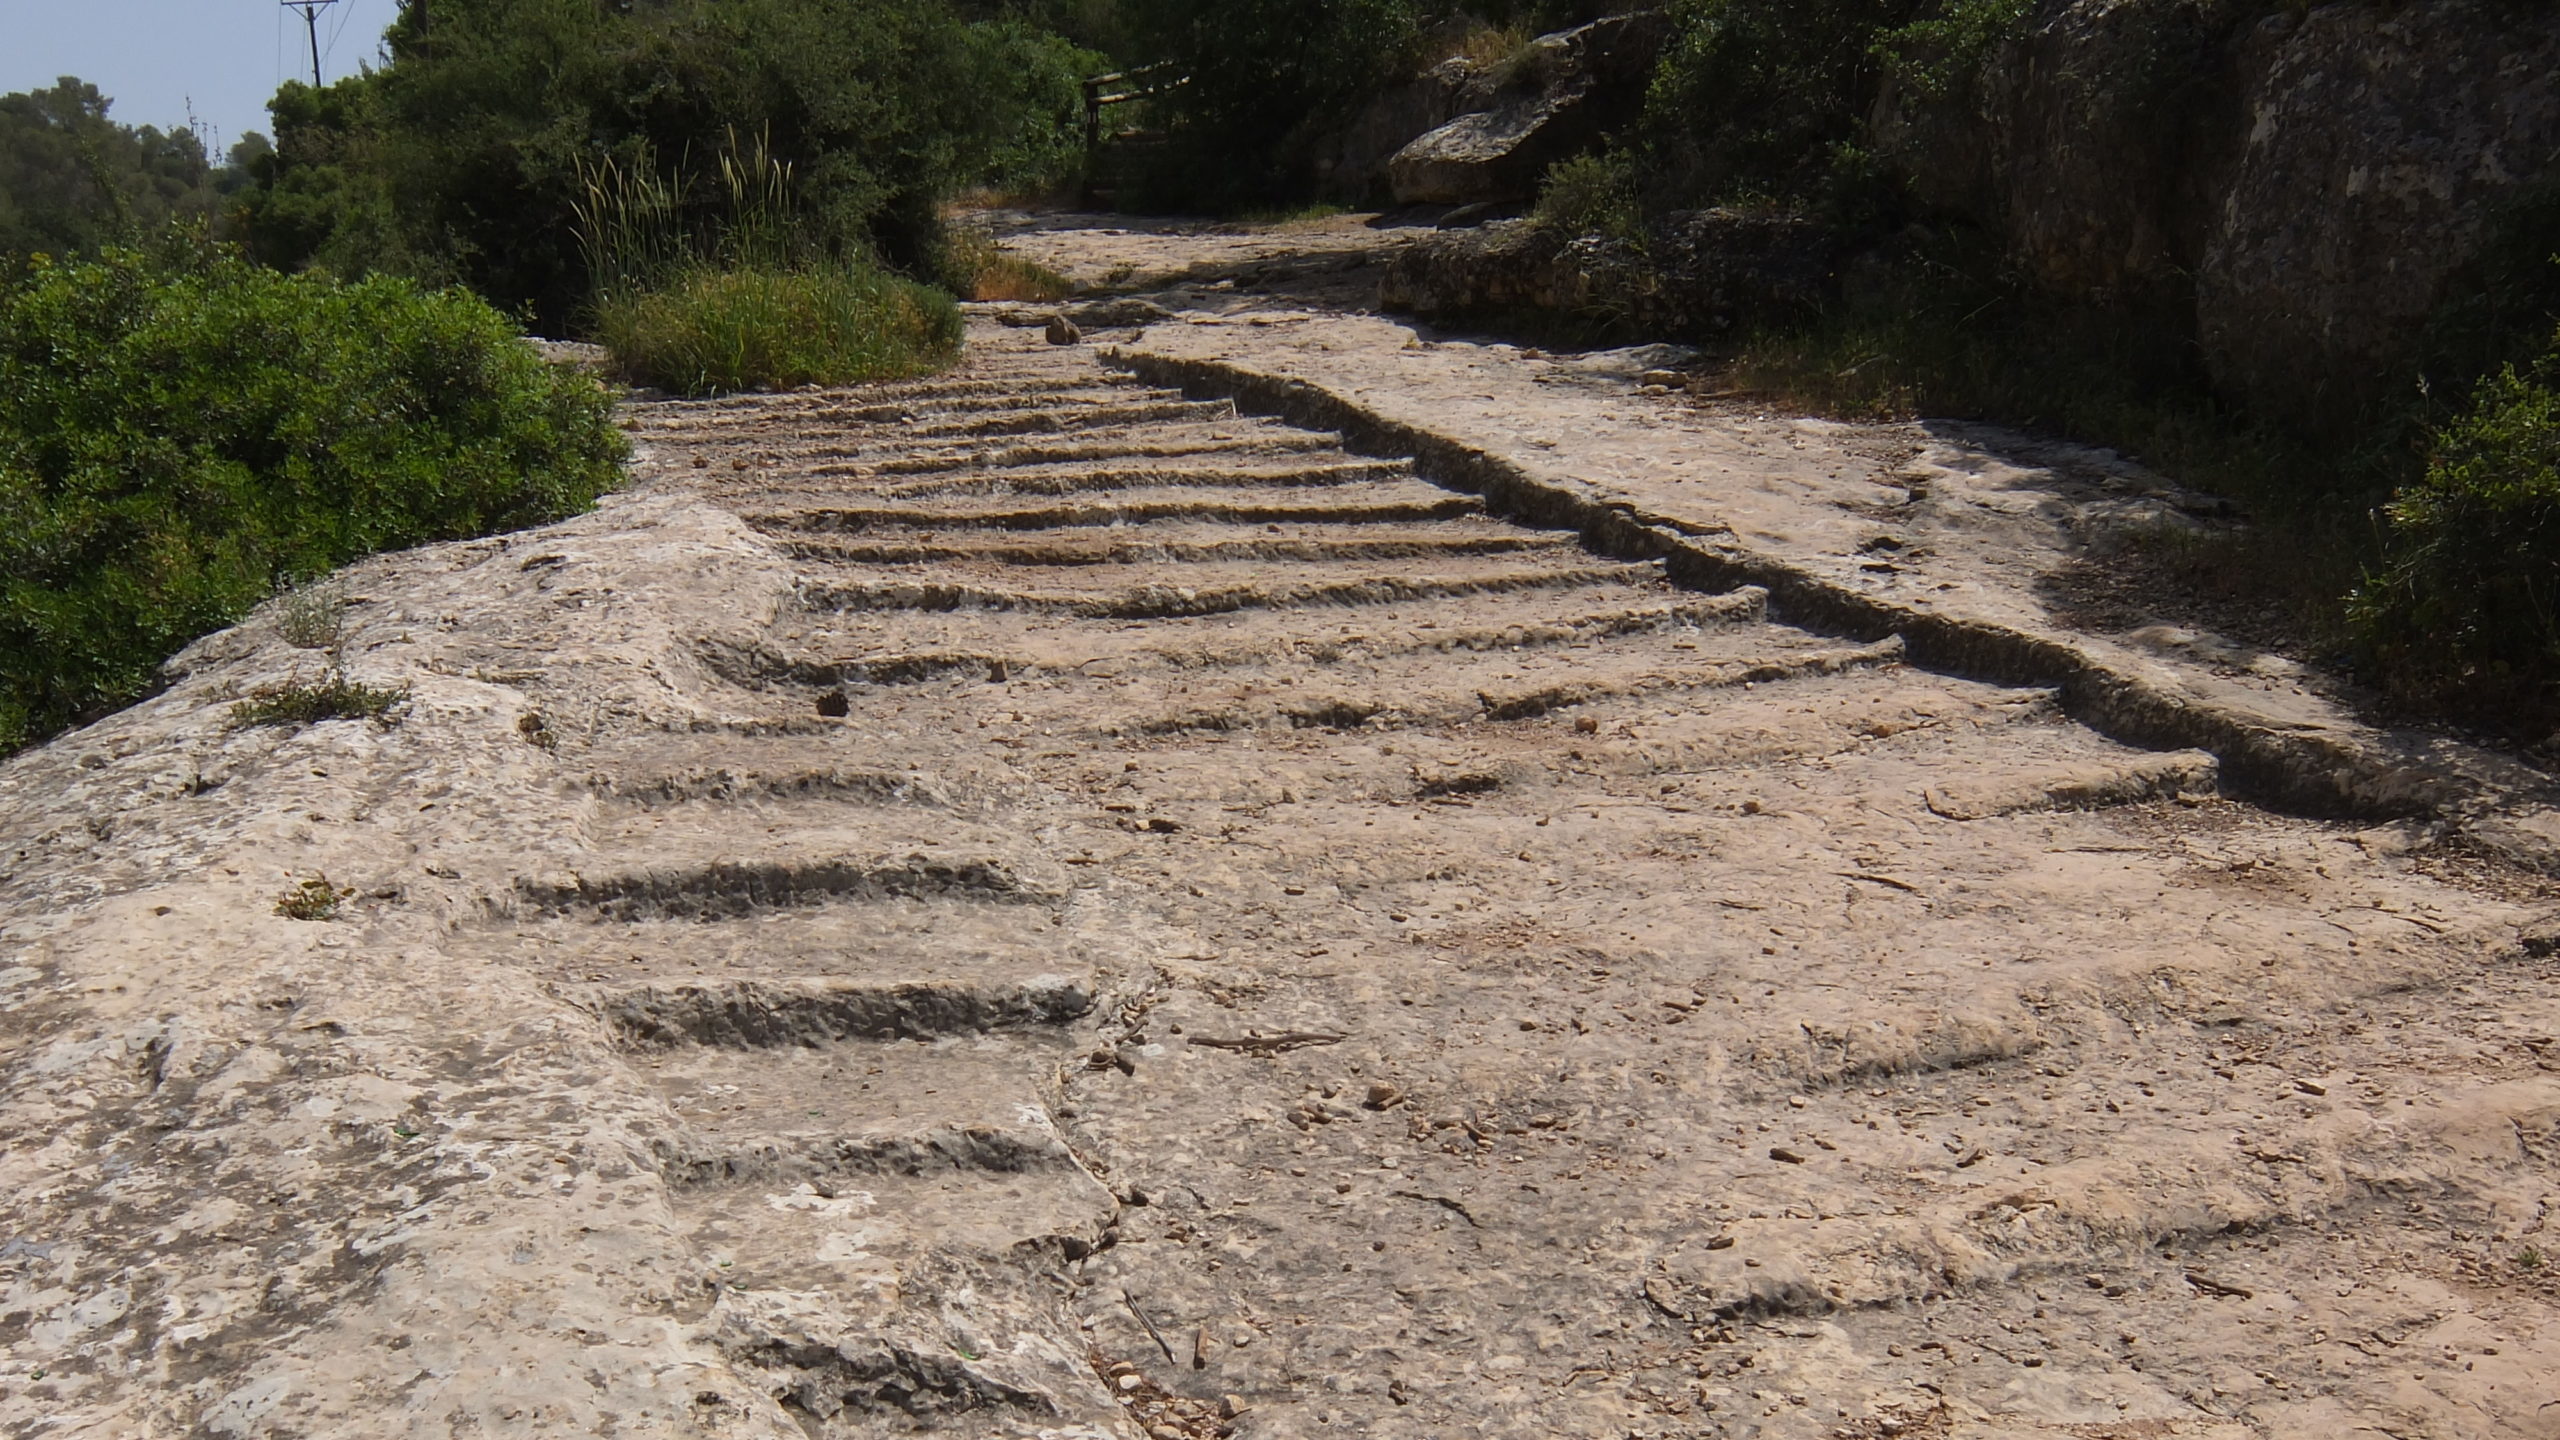 Archaeologists in Israel Uncover Section of Ancient Roman Road